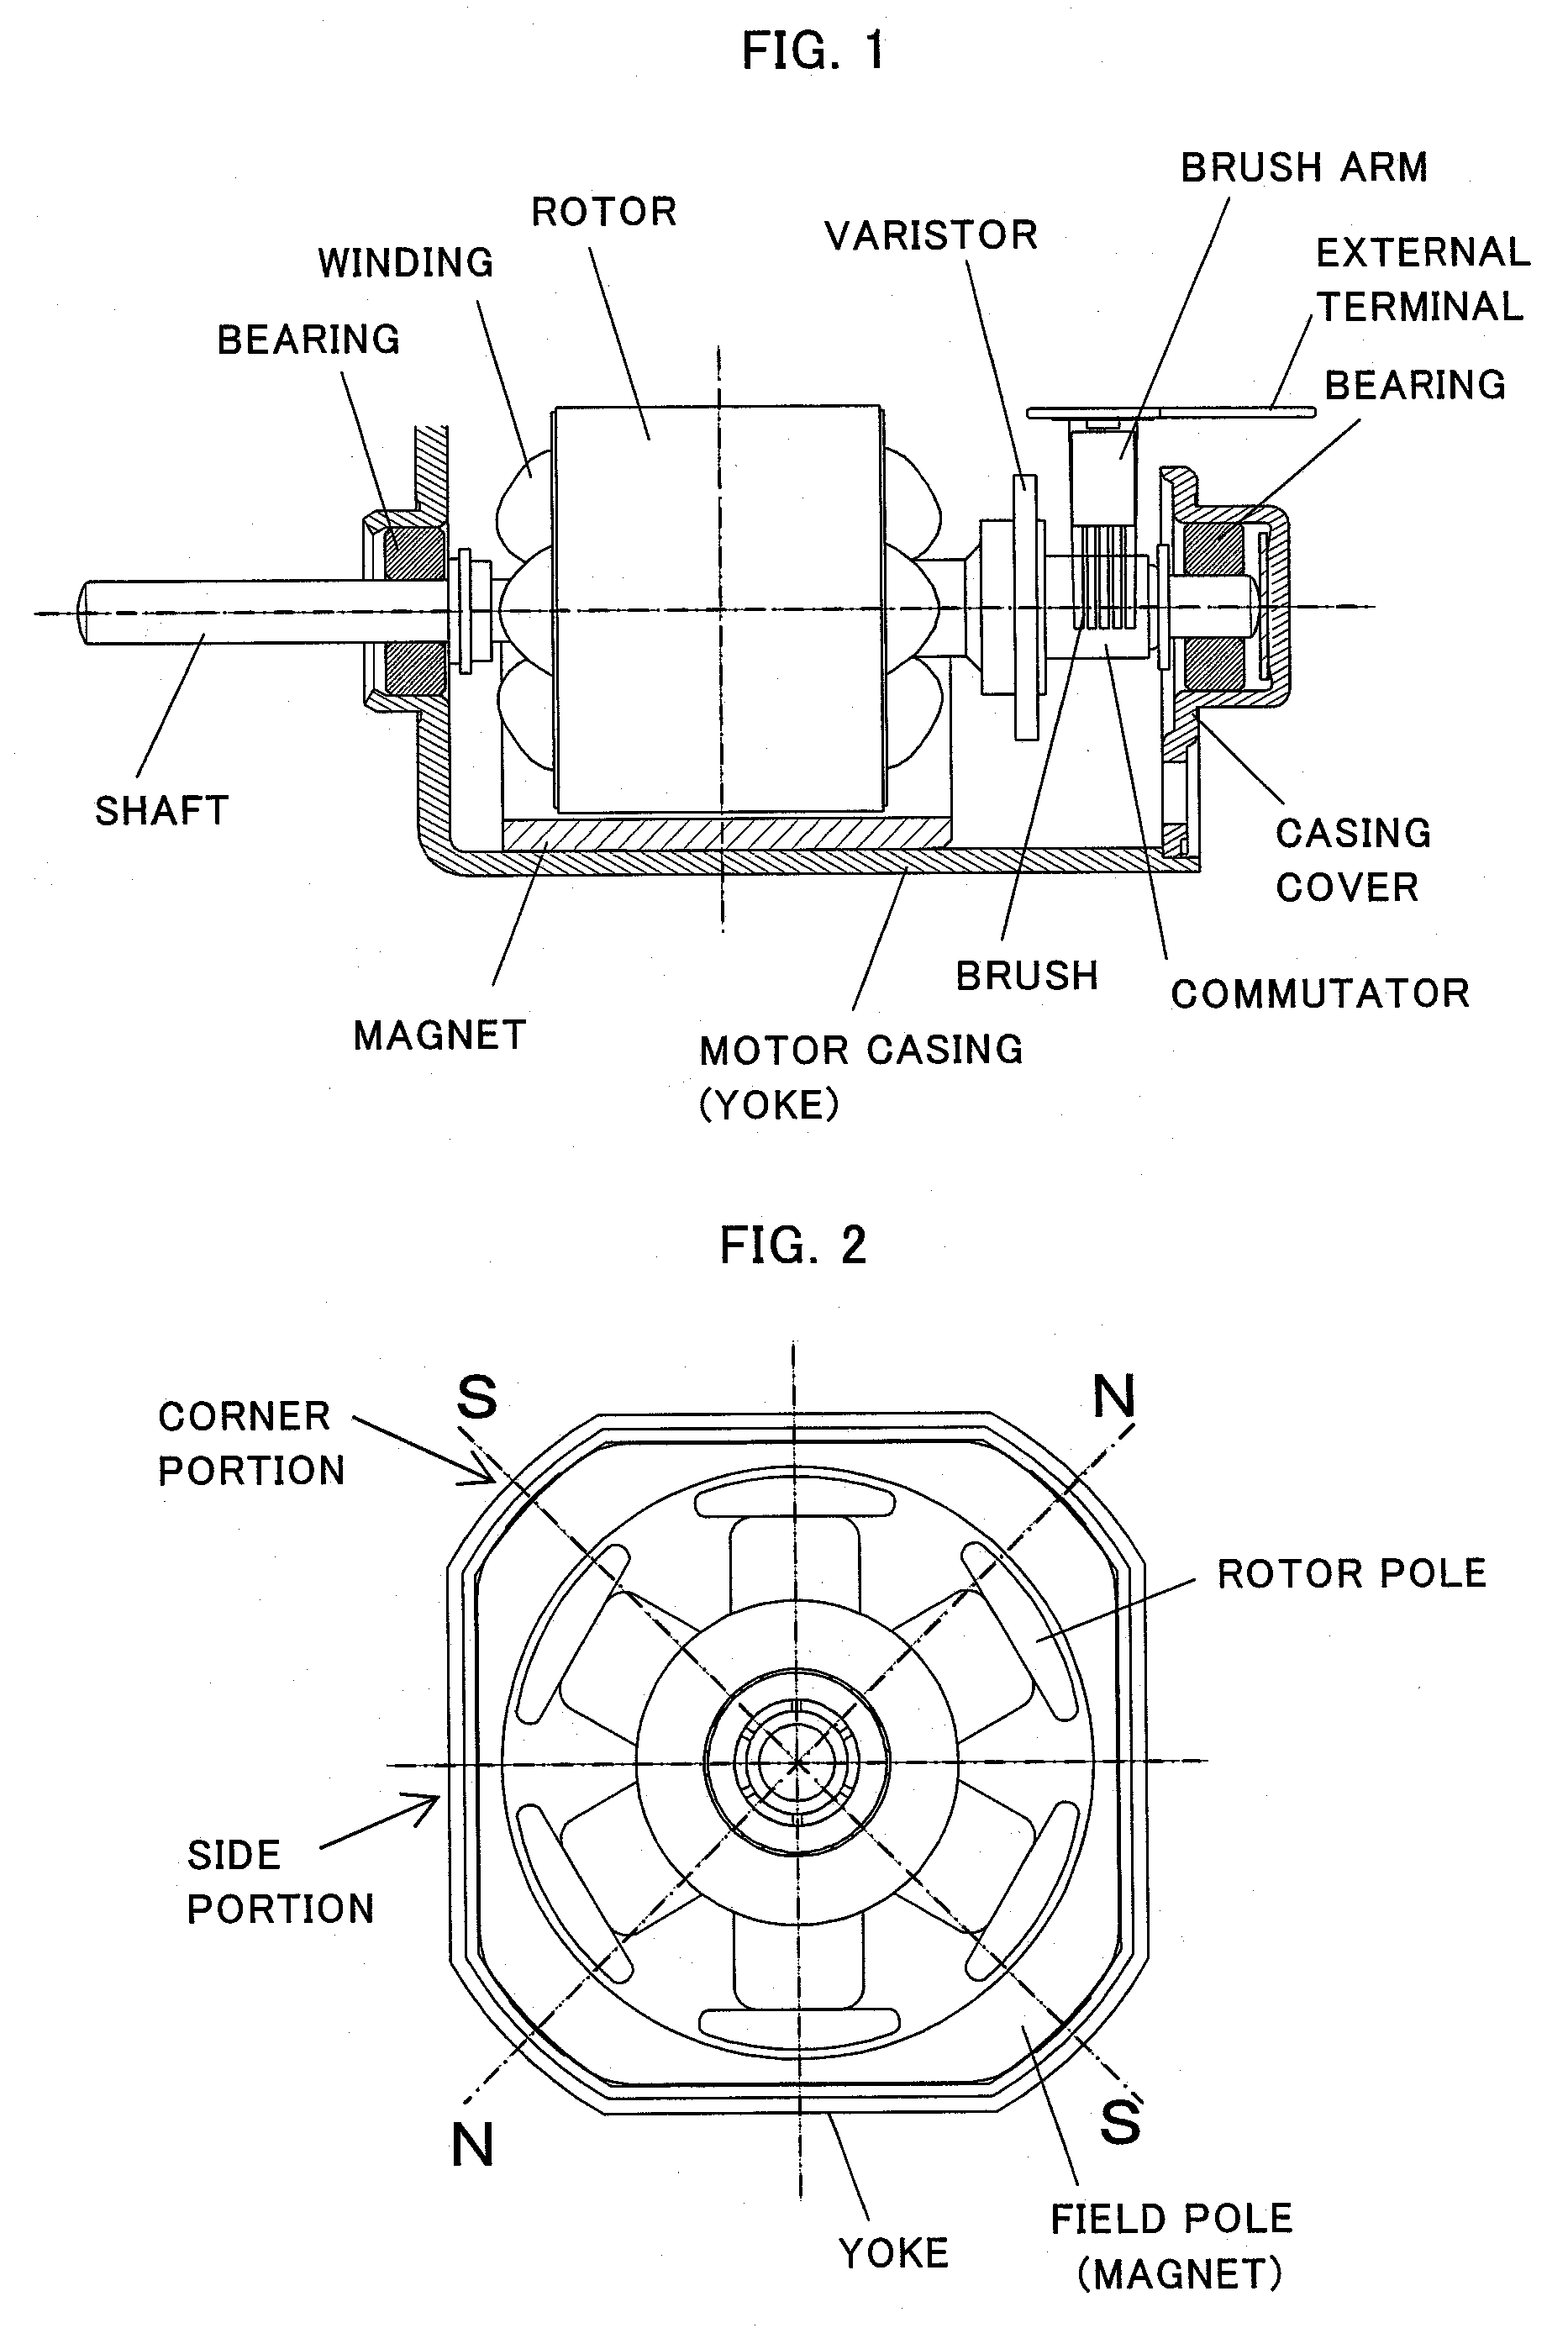 Small-sized motor having polygonal outer shape